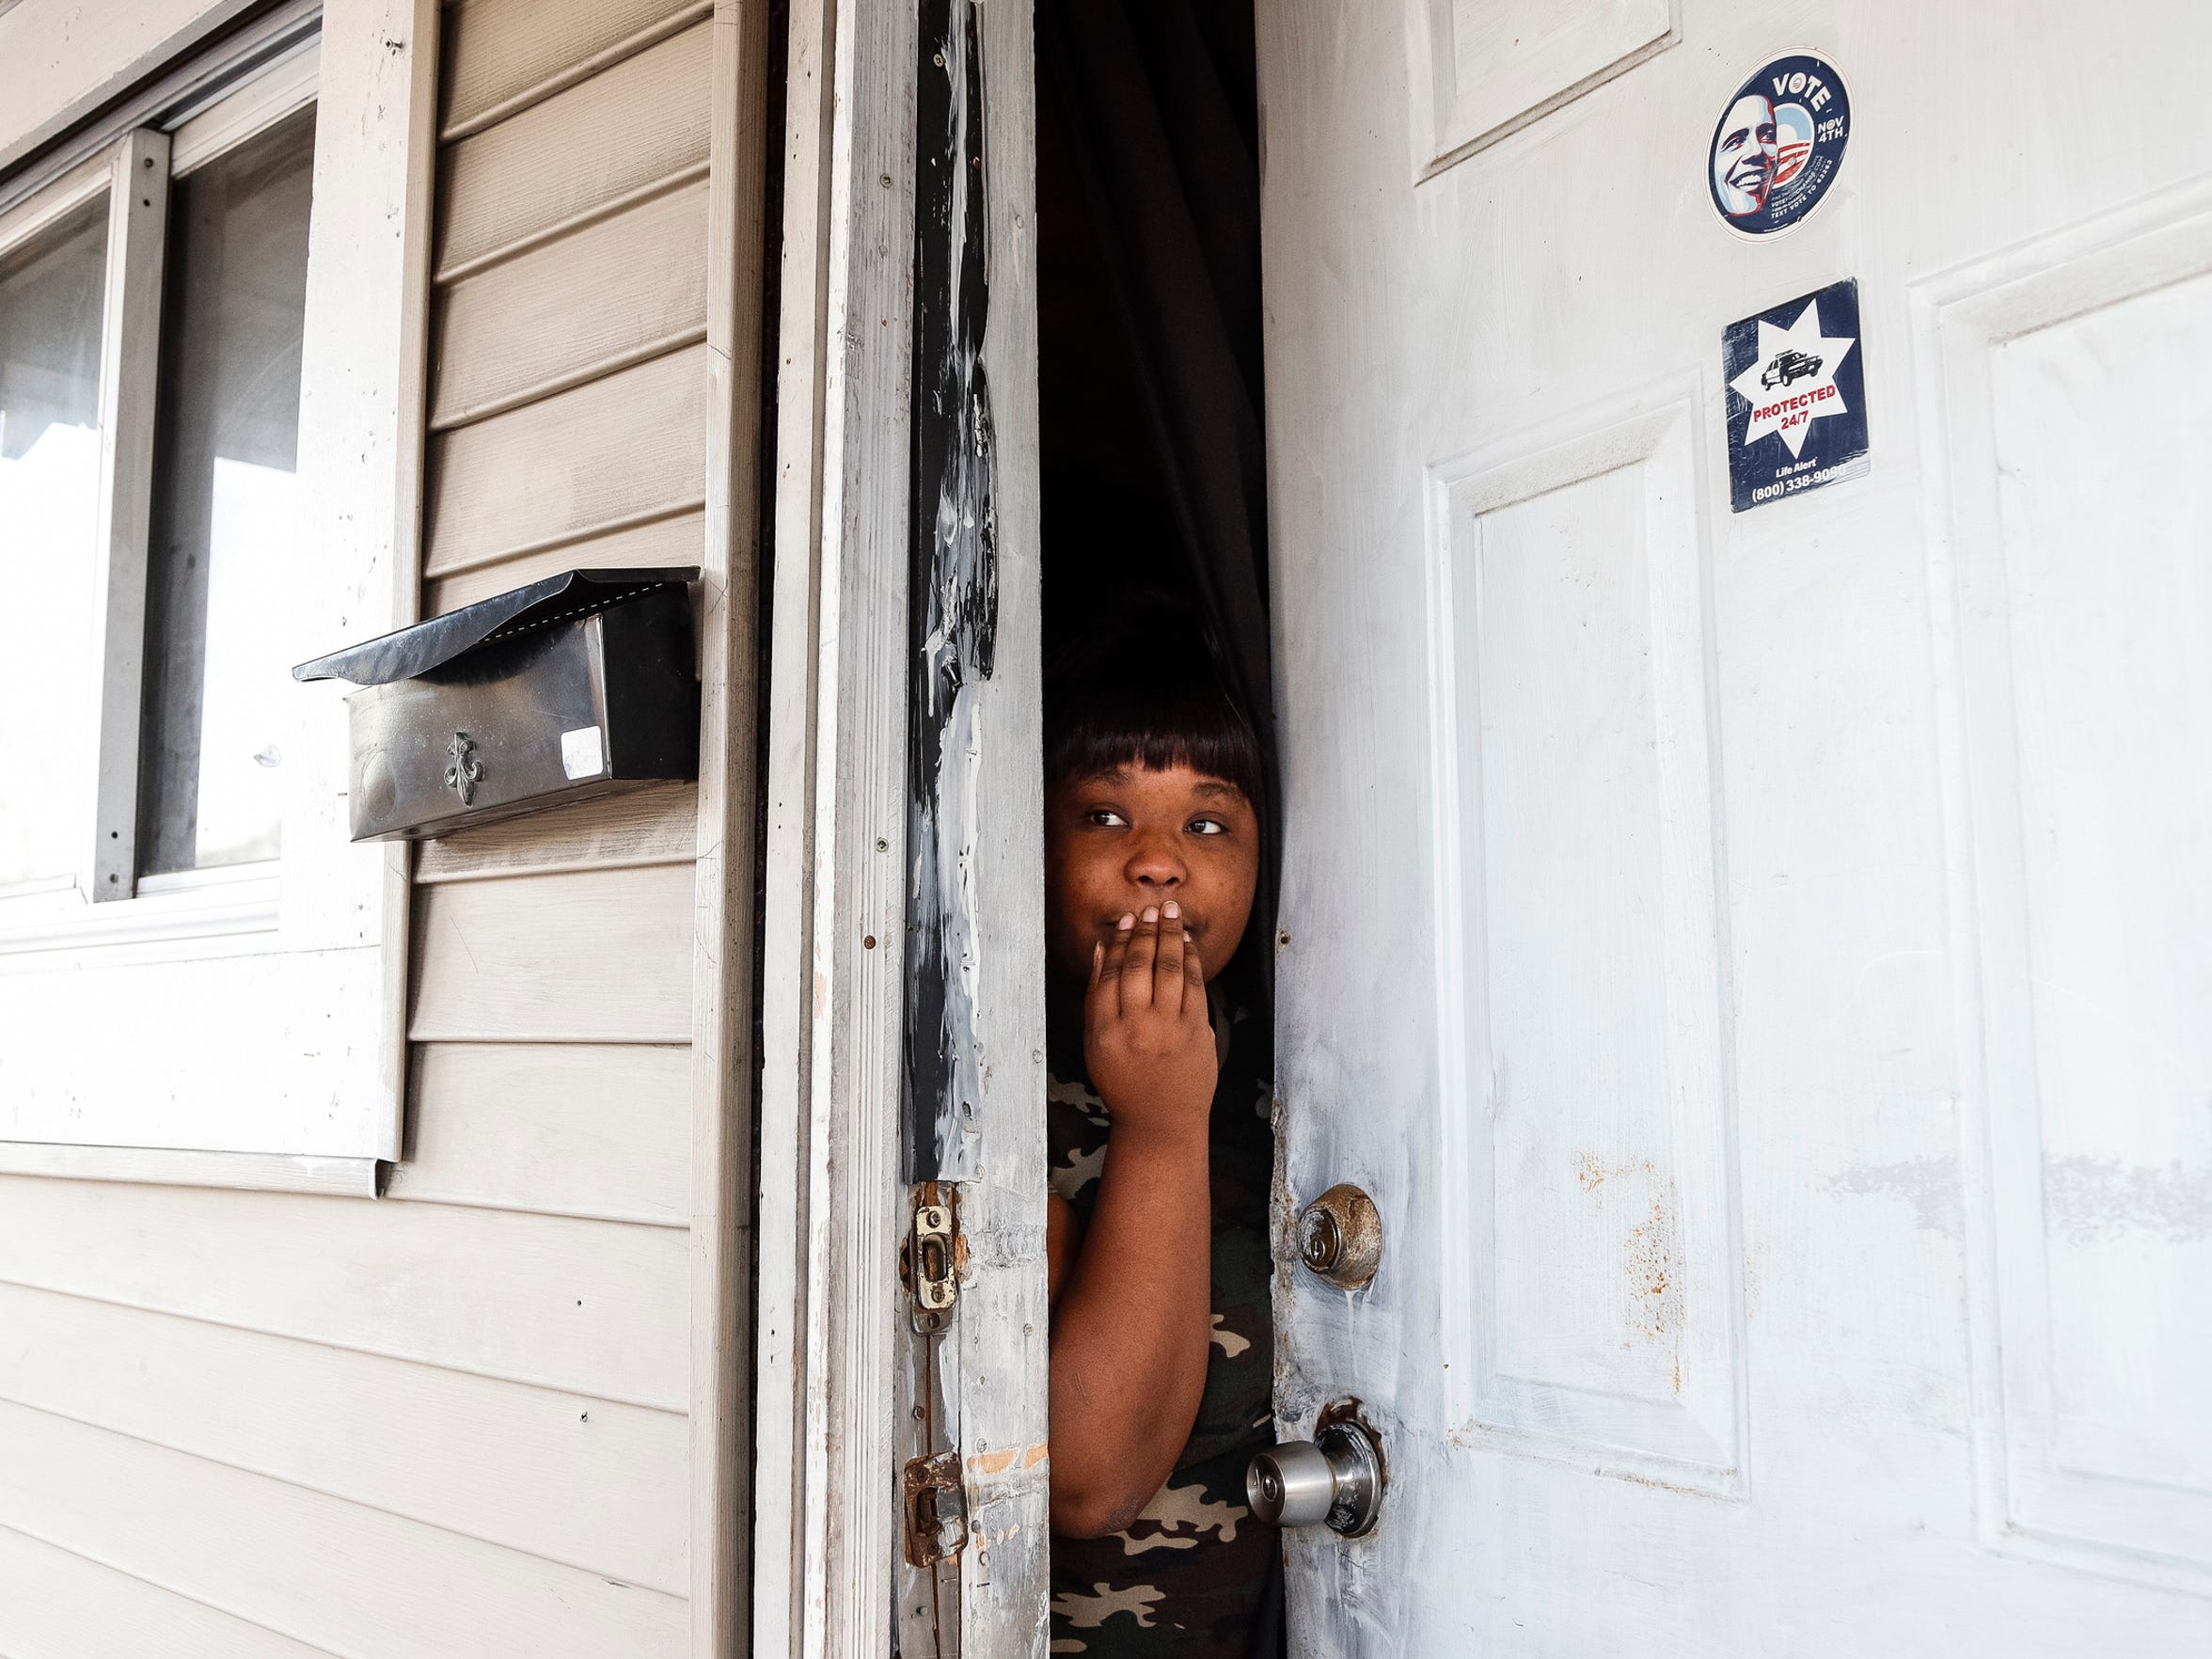 Pauletta Lawrence talks to the Free Press in December from the door of a land bank house on Richton where Immanuel Foster, 7, was found tortured in 2014. The boy died. (Photo taken Dec. 20, 2017)